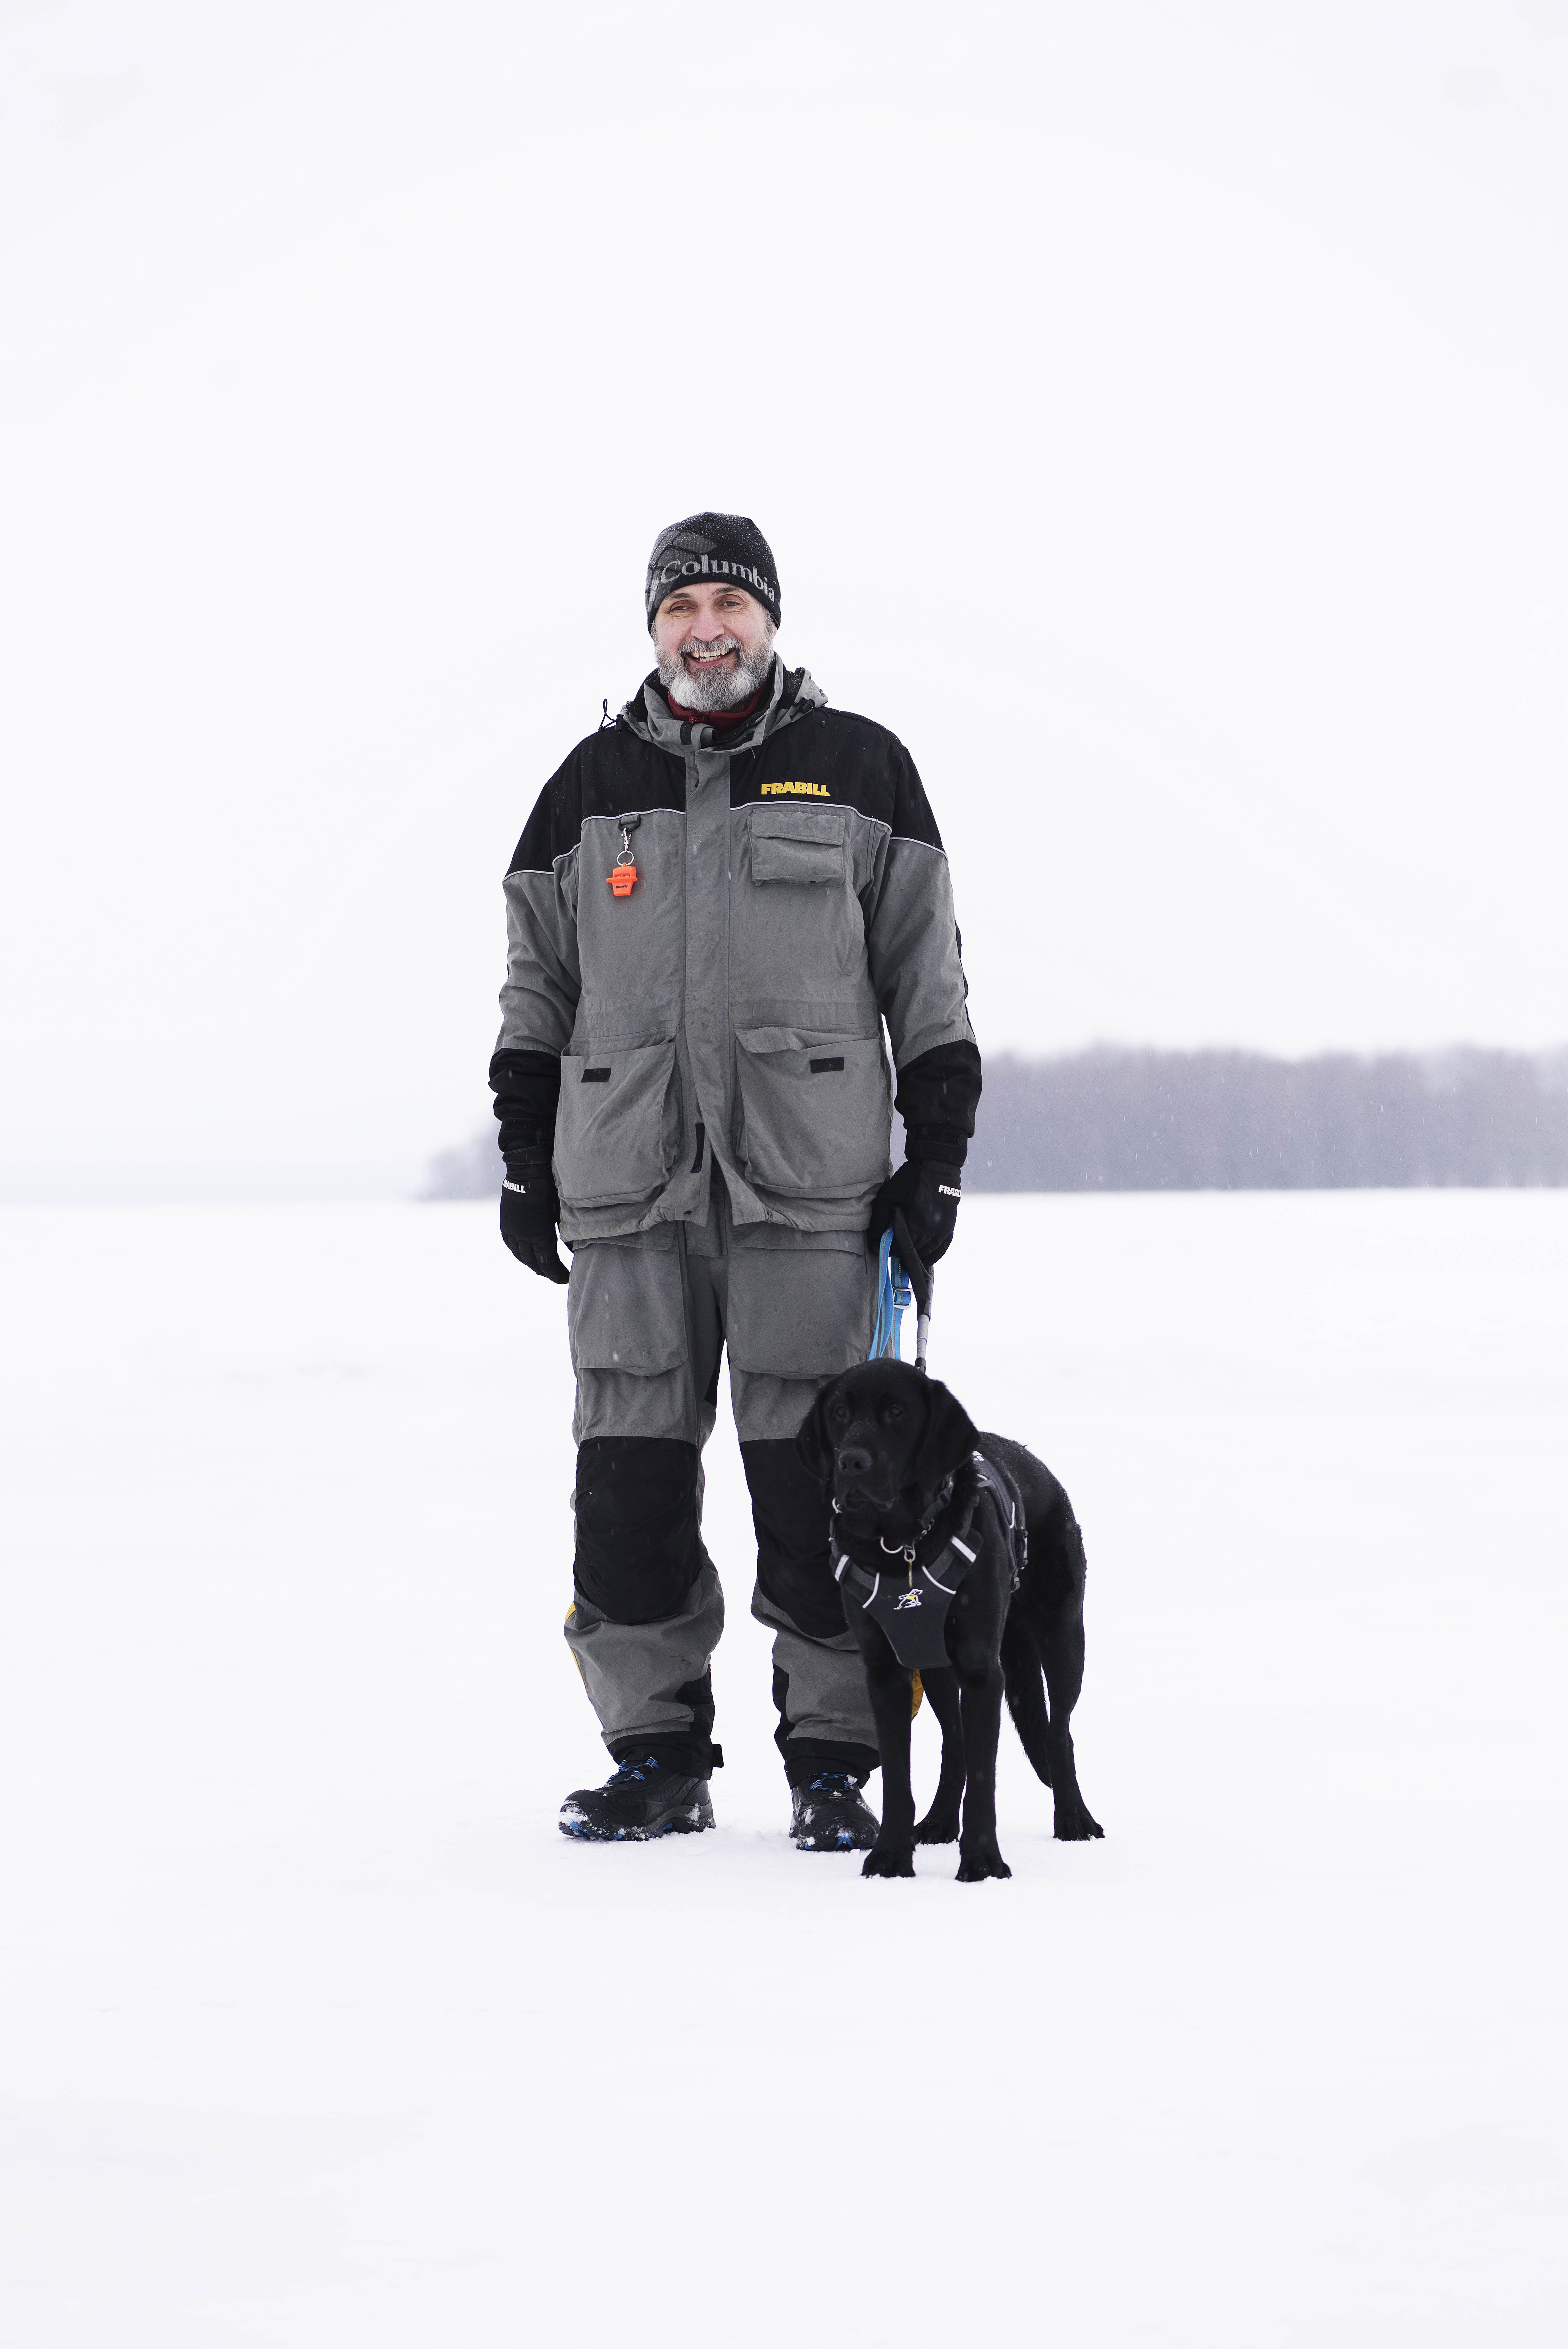 Lawrence and his guide dog enjoying the wintery great outdoors. They stand together on a snow-covered frozen lake.